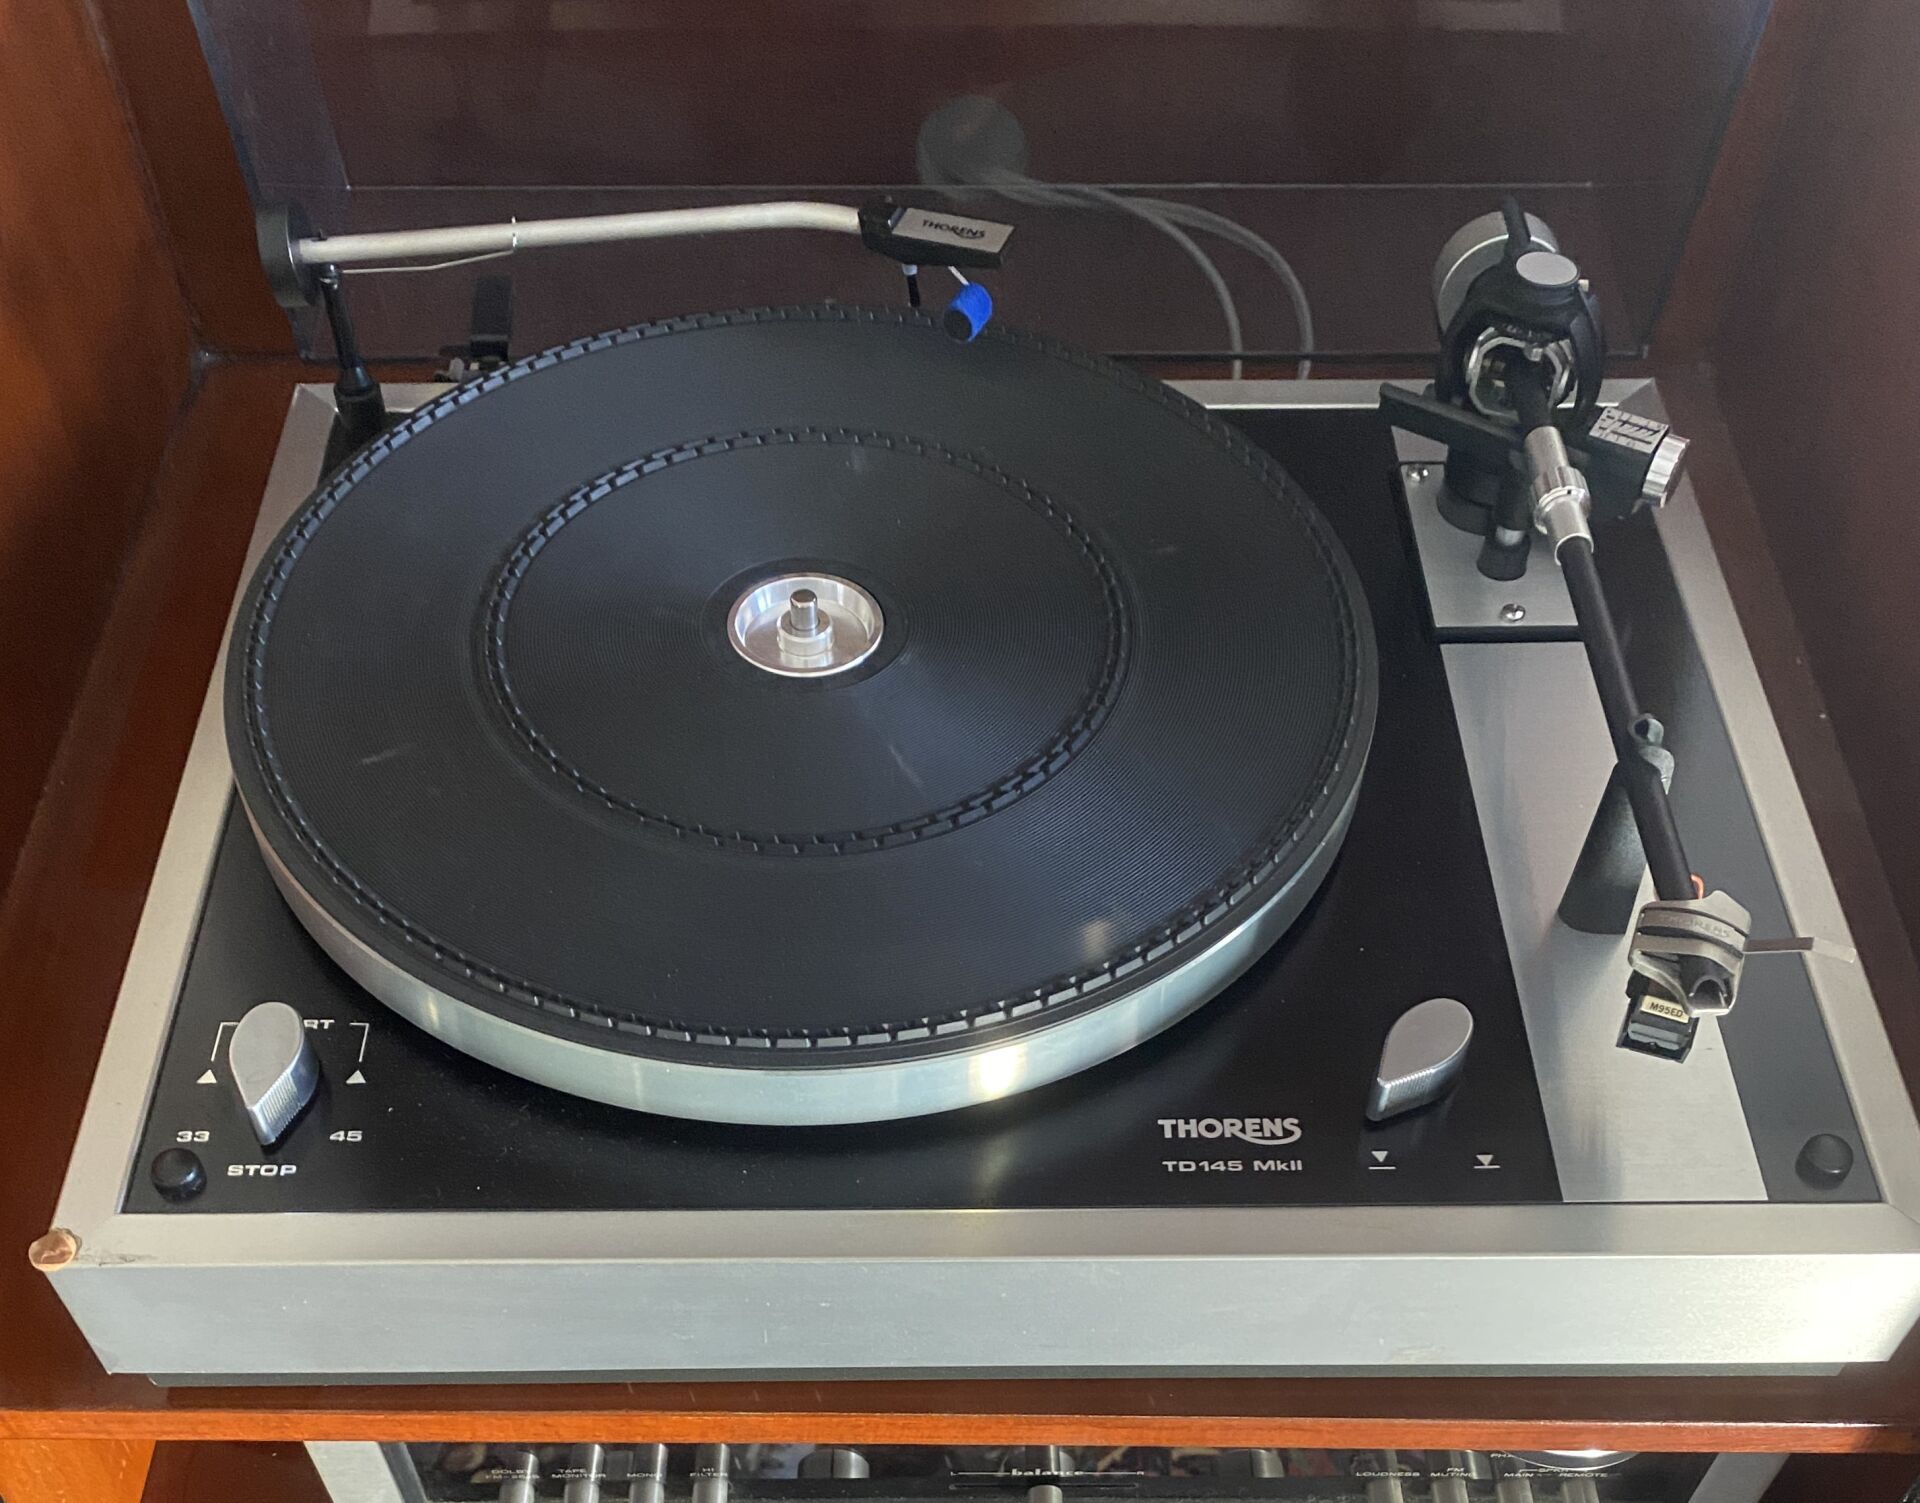 Null THORENS - TD 145 MKII vinyl turntable with SCHURE M95 ED cell.

Sold untest&hellip;